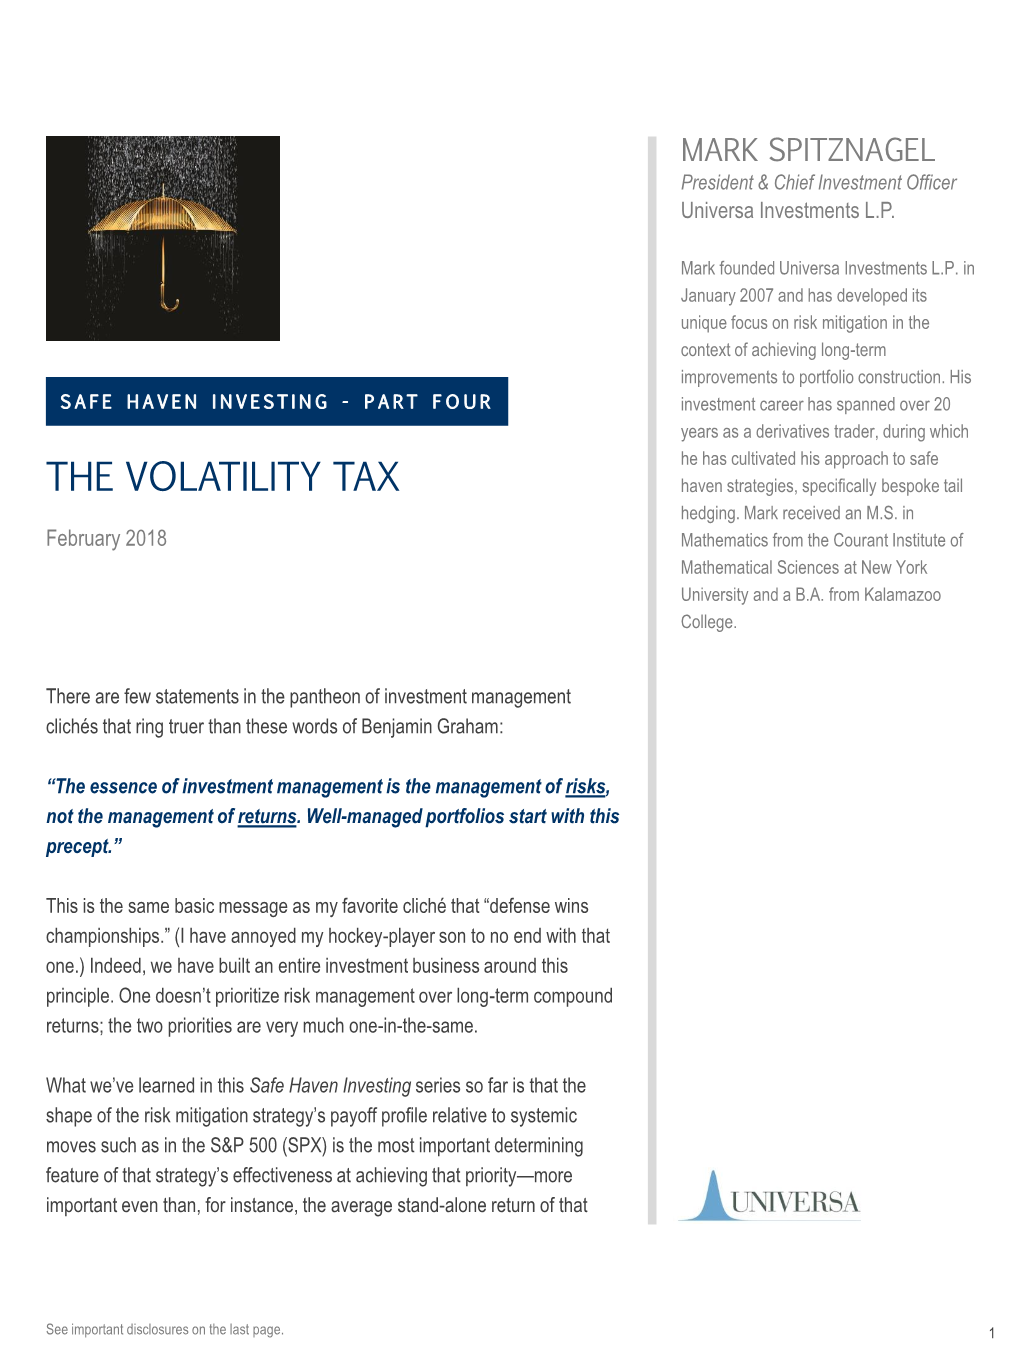 THE VOLATILITY TAX Haven Strategies, Specifically Bespoke Tail Hedging